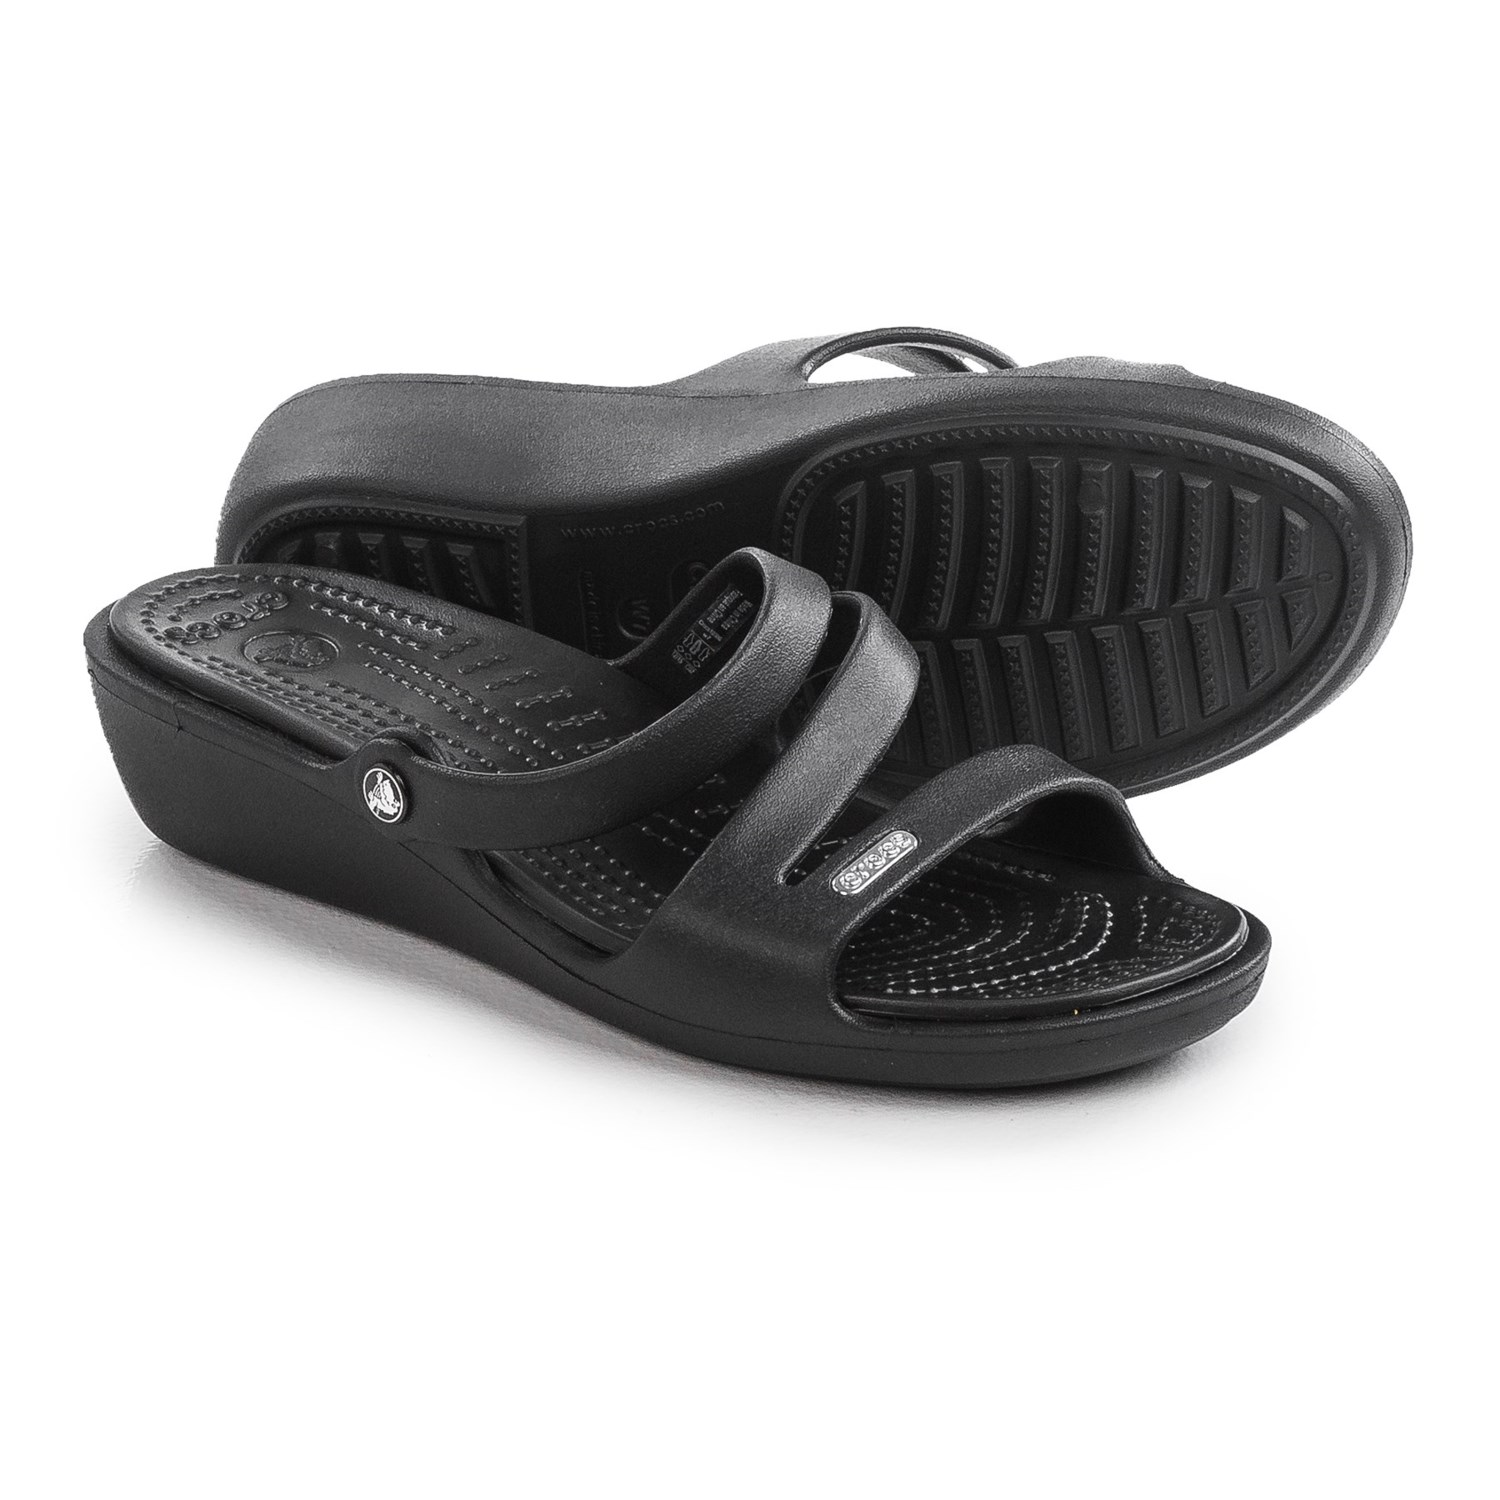 Crocs Patricia Wedge Sandals (For Women) - Save 52%